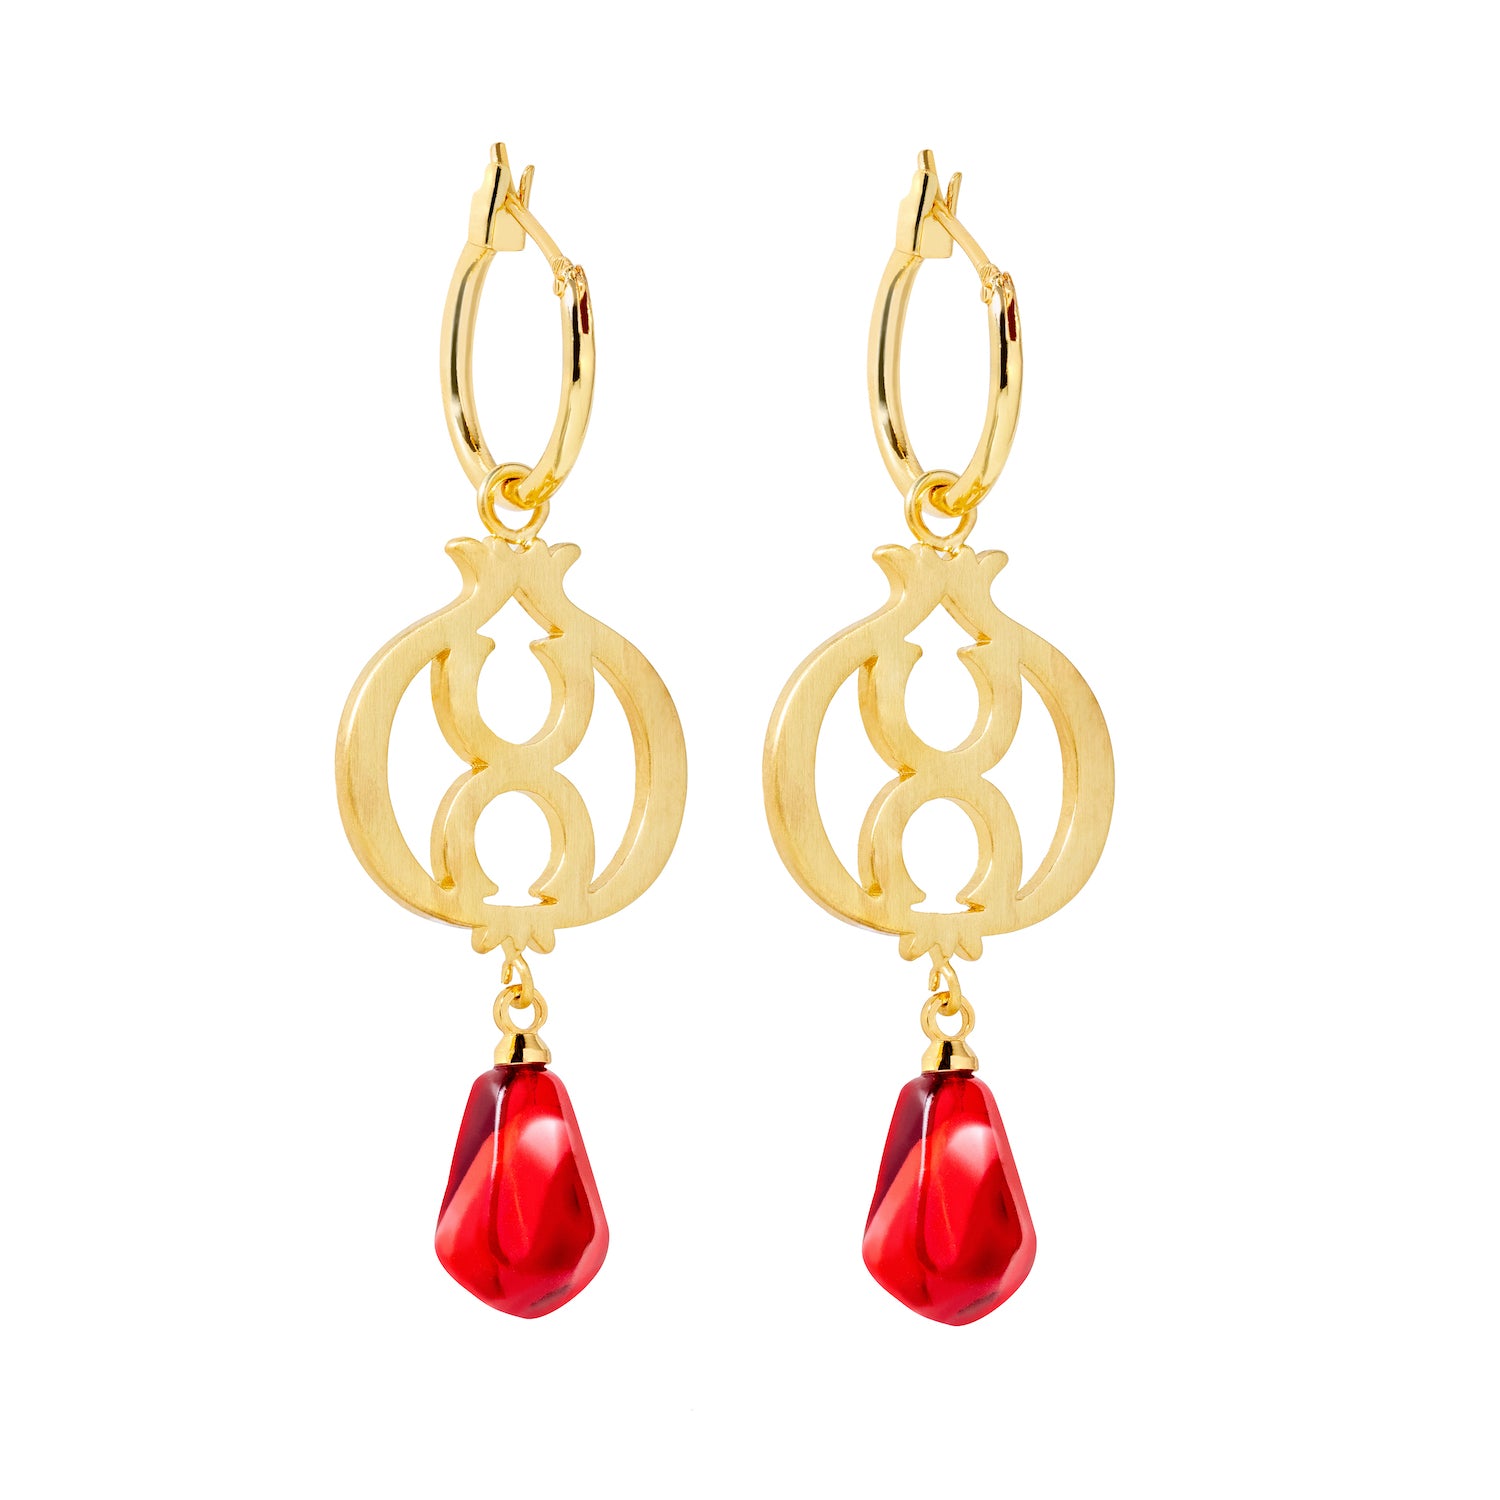 Pomegranate Drop Earrings with Satin Finish and Gold Plating - Anet Abnous Design - Earrings - Bijou Her -  -  - 